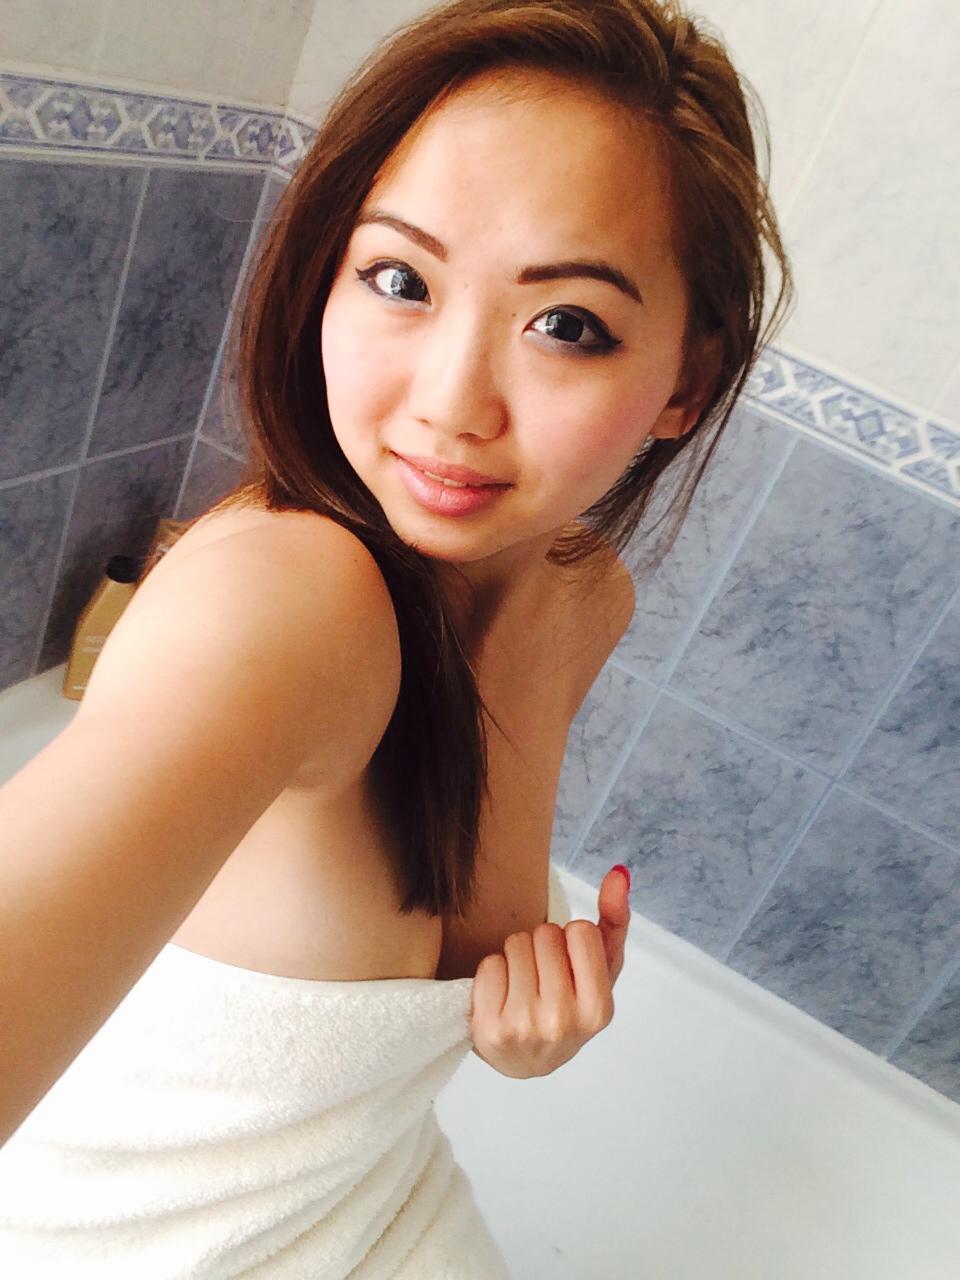 Naked asians in the shower